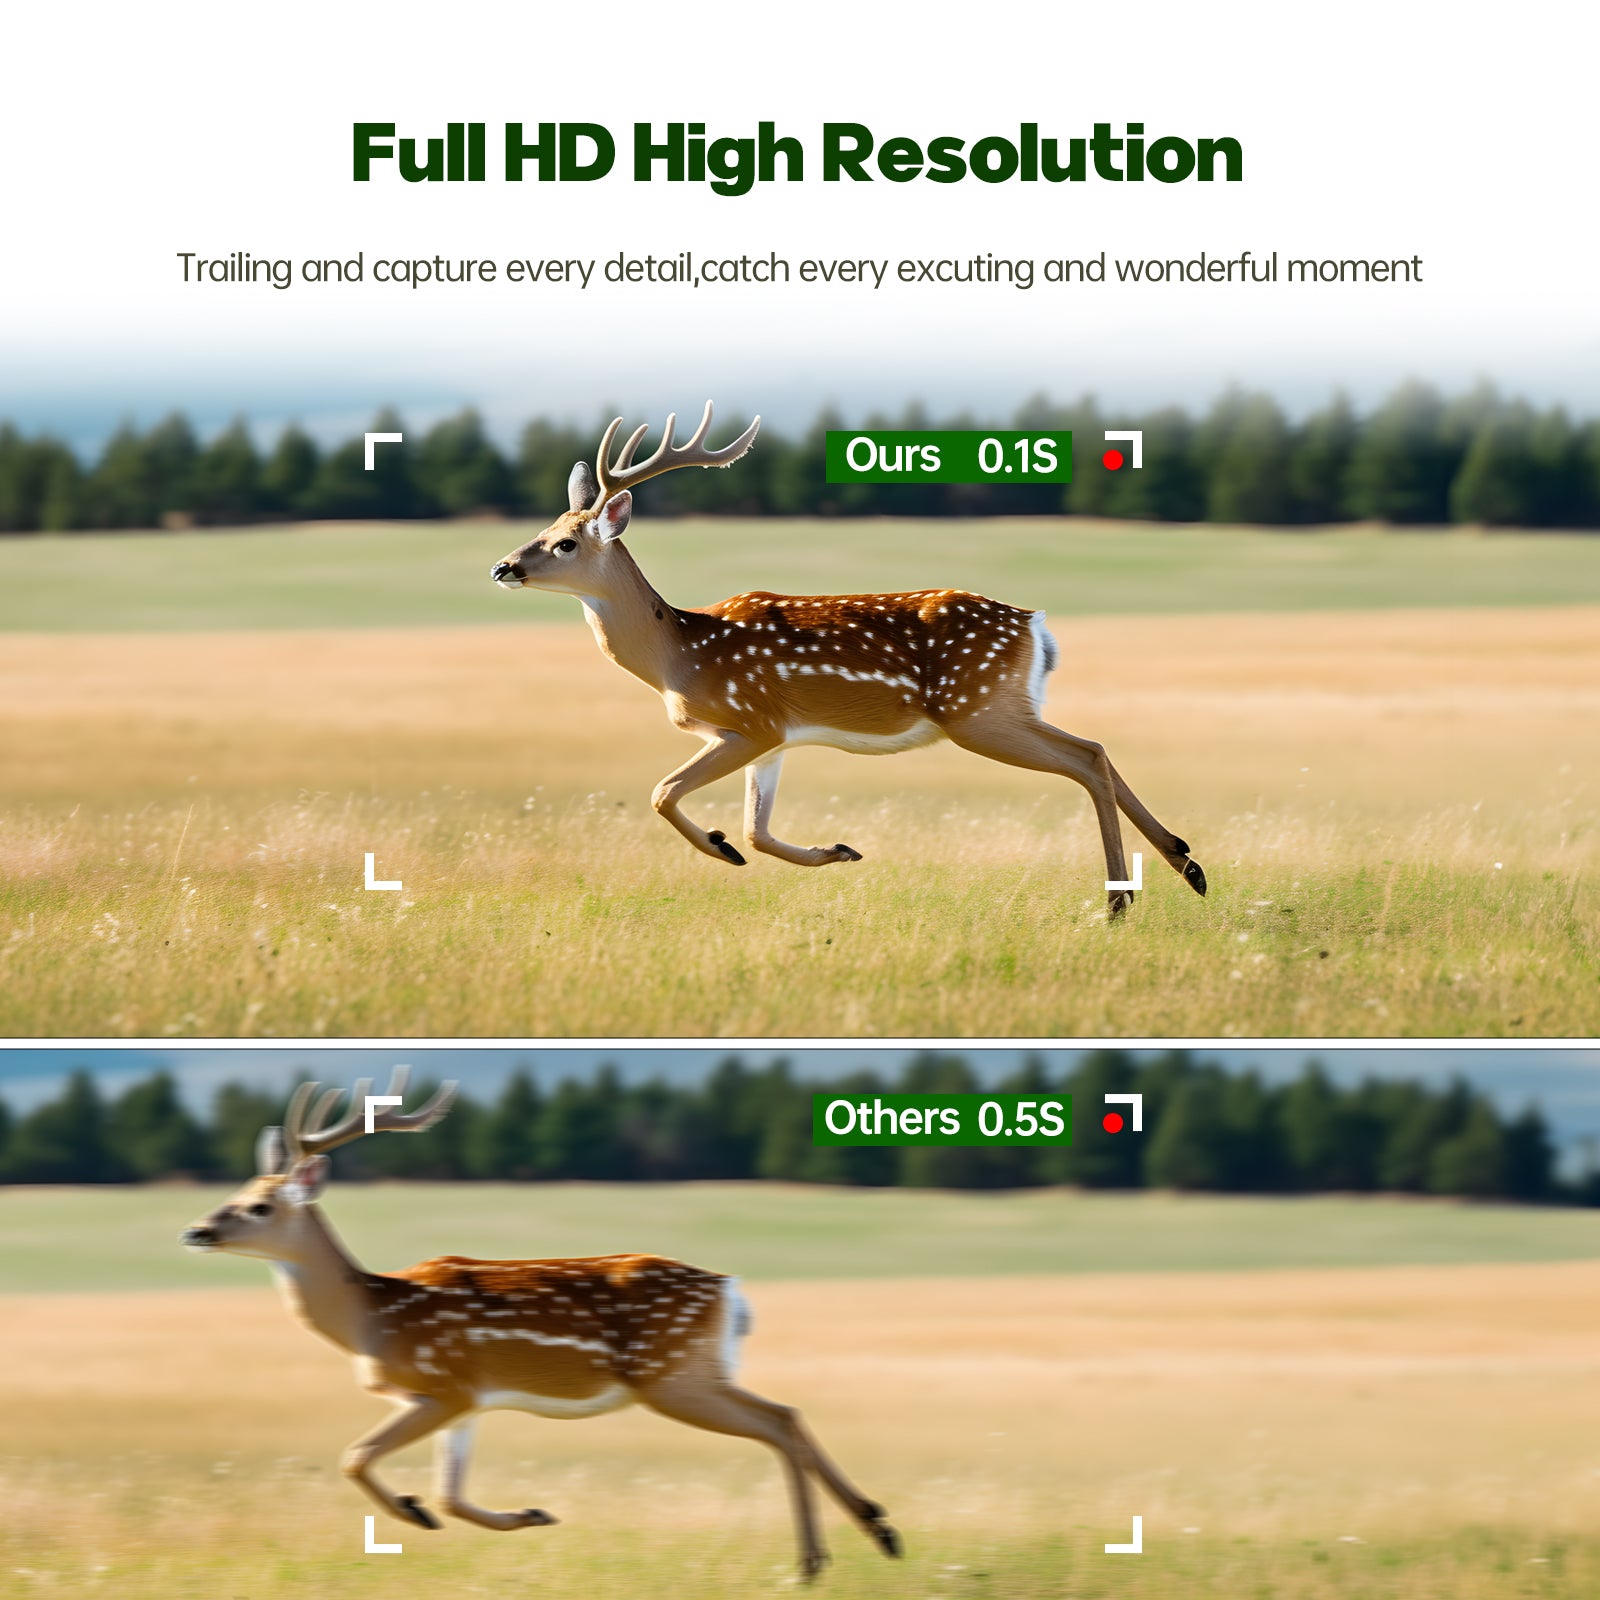  1080P Solar Trail Camera, Game Wildlife Hunting & Trail Cameras with 120° Detection Angle Night Vision Motion Activated